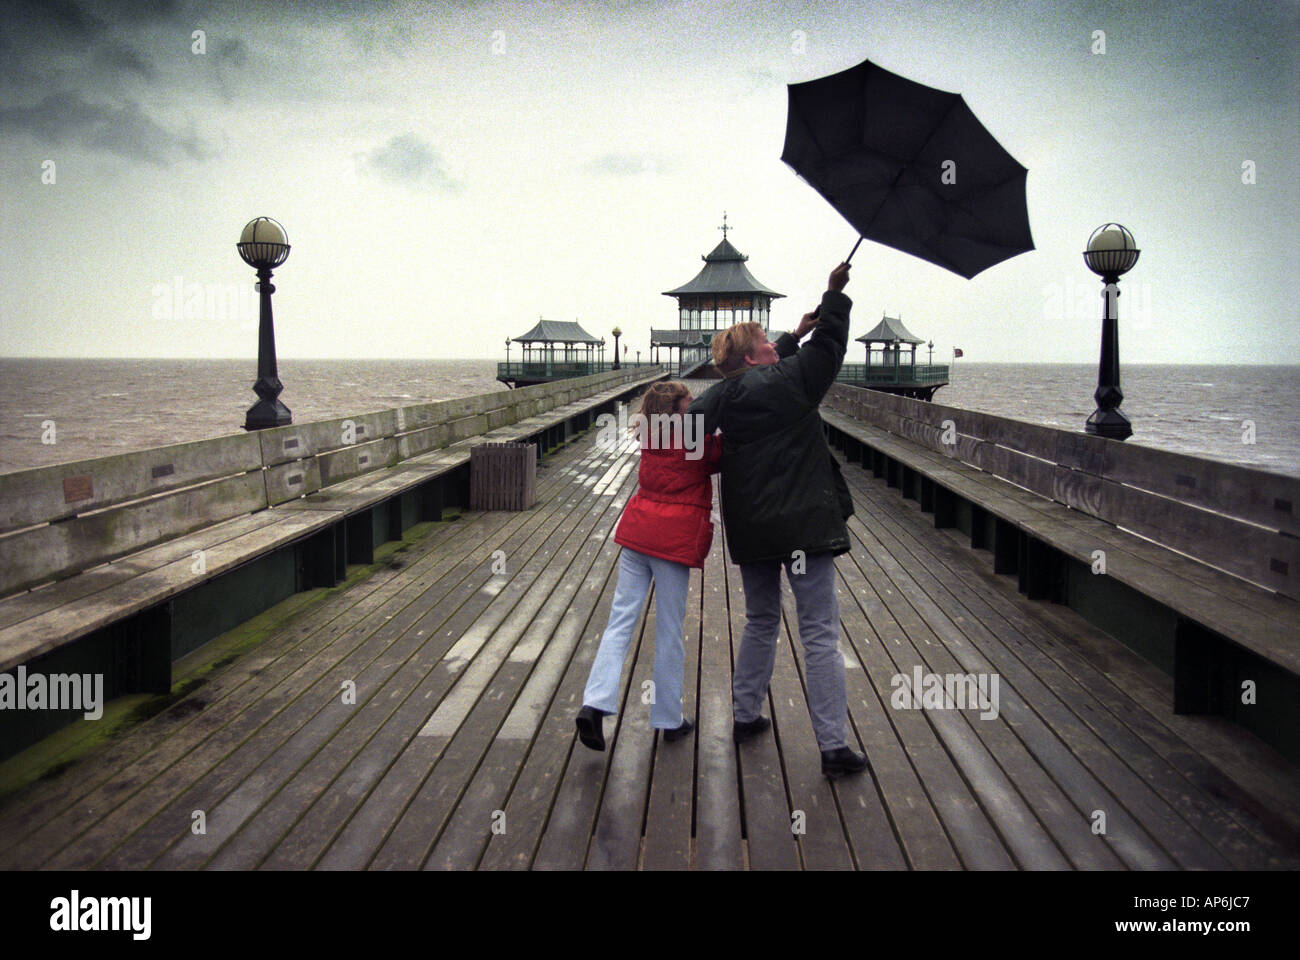 A GIRL AND HER MOTHER STRUGGLE WITH A BLACK UMBRELLA DURING A WALK ON CLEVEDON PIER NORTH SOMERSET UK Stock Photo